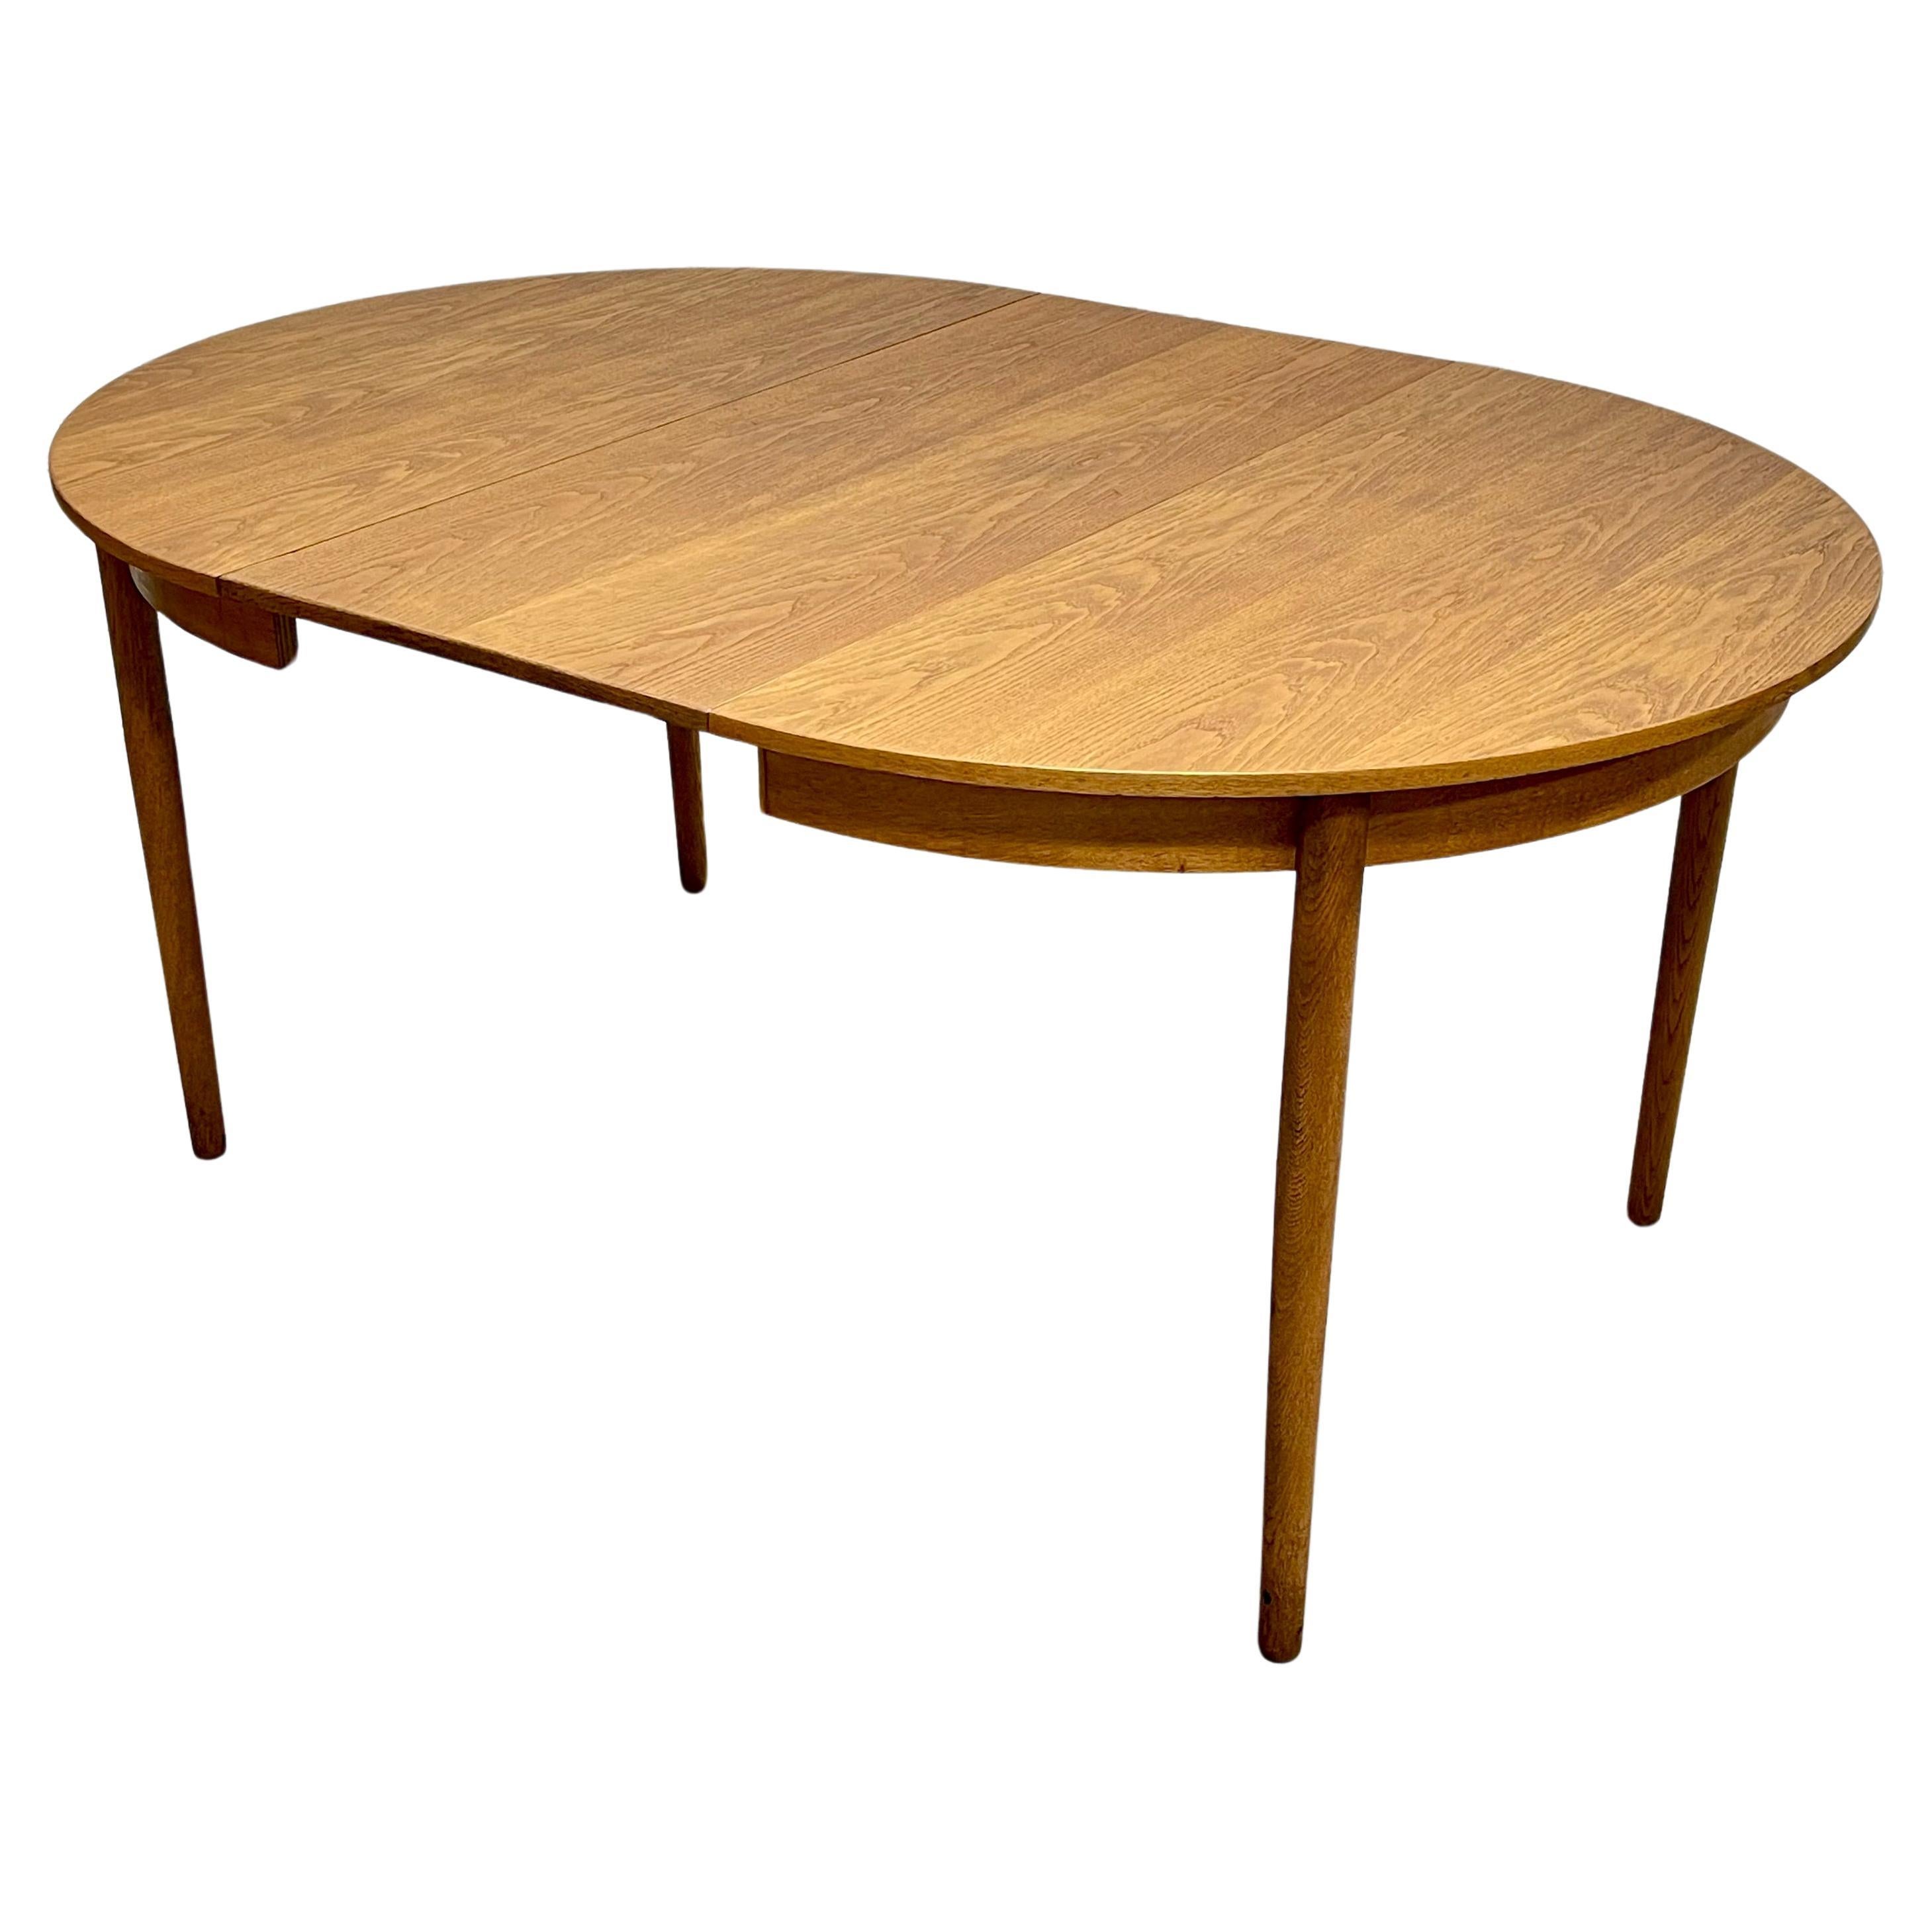 Mid Century MODERN Oak ROUND to OVAL Dining Table, Made in Denmark, c. 1960's For Sale